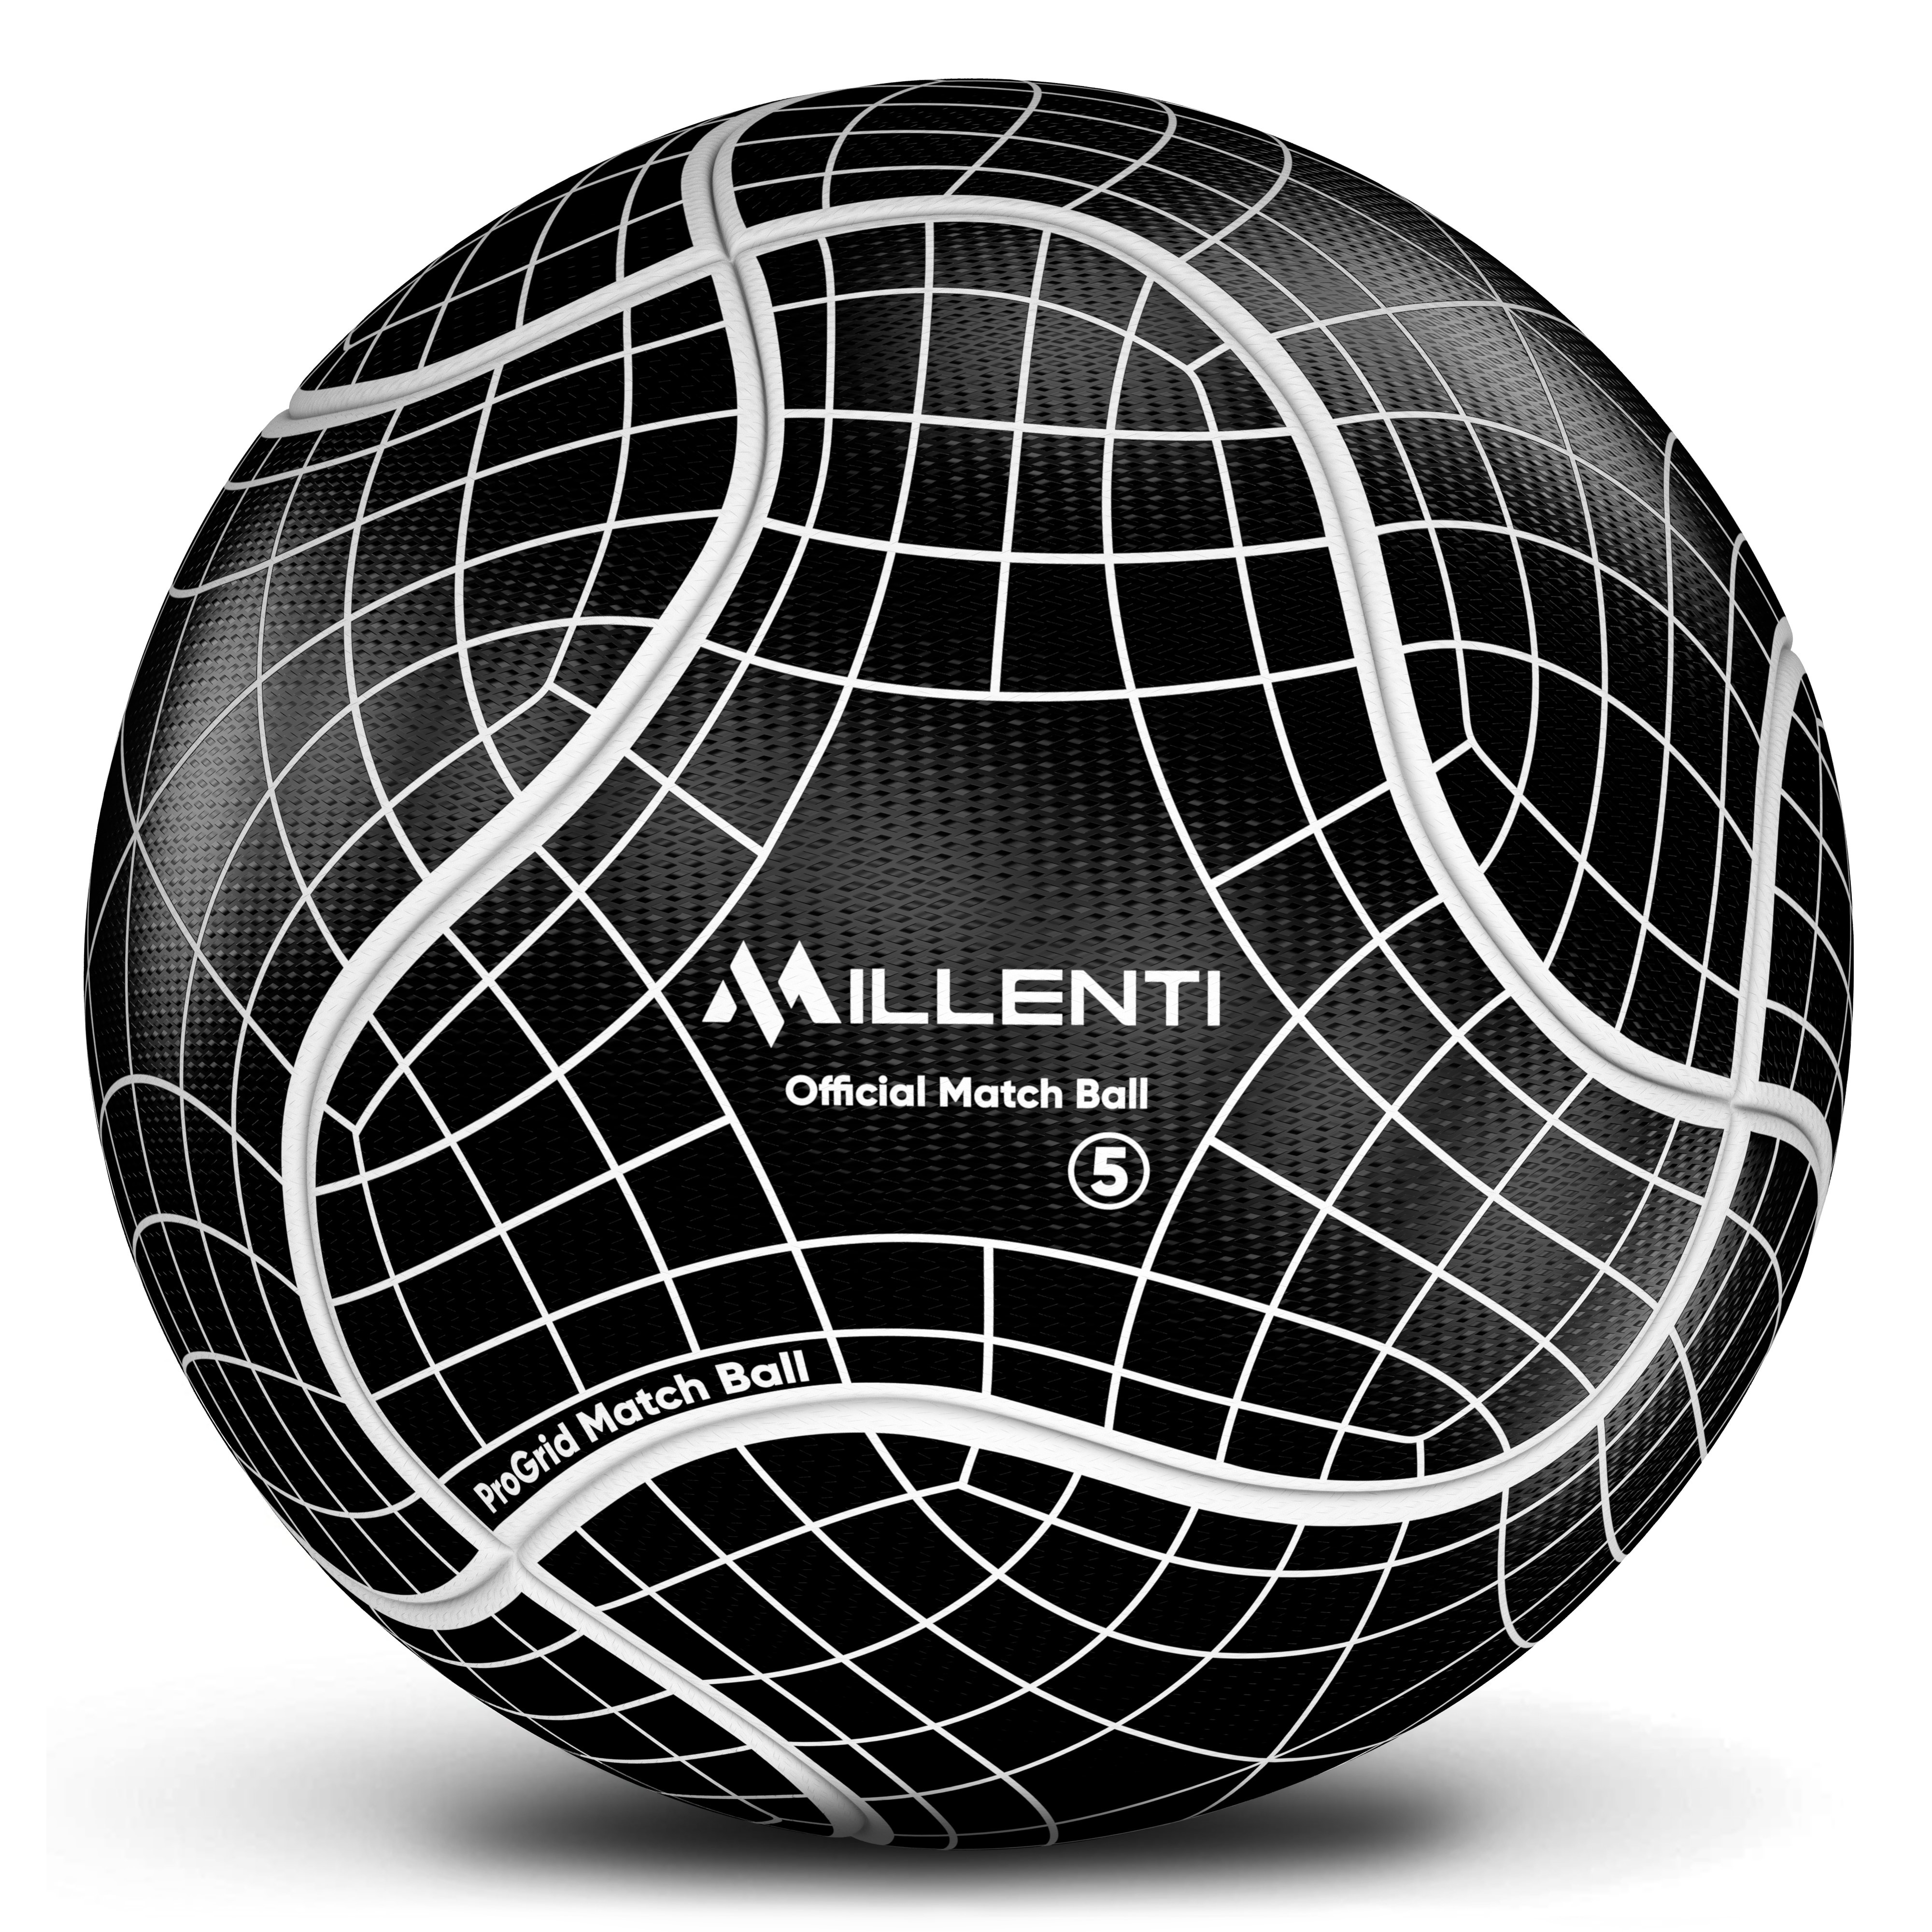 Black White, 5 Thermal Bonded Size 5 Millenti Knuckle-It Pro Match Soccer Ball 